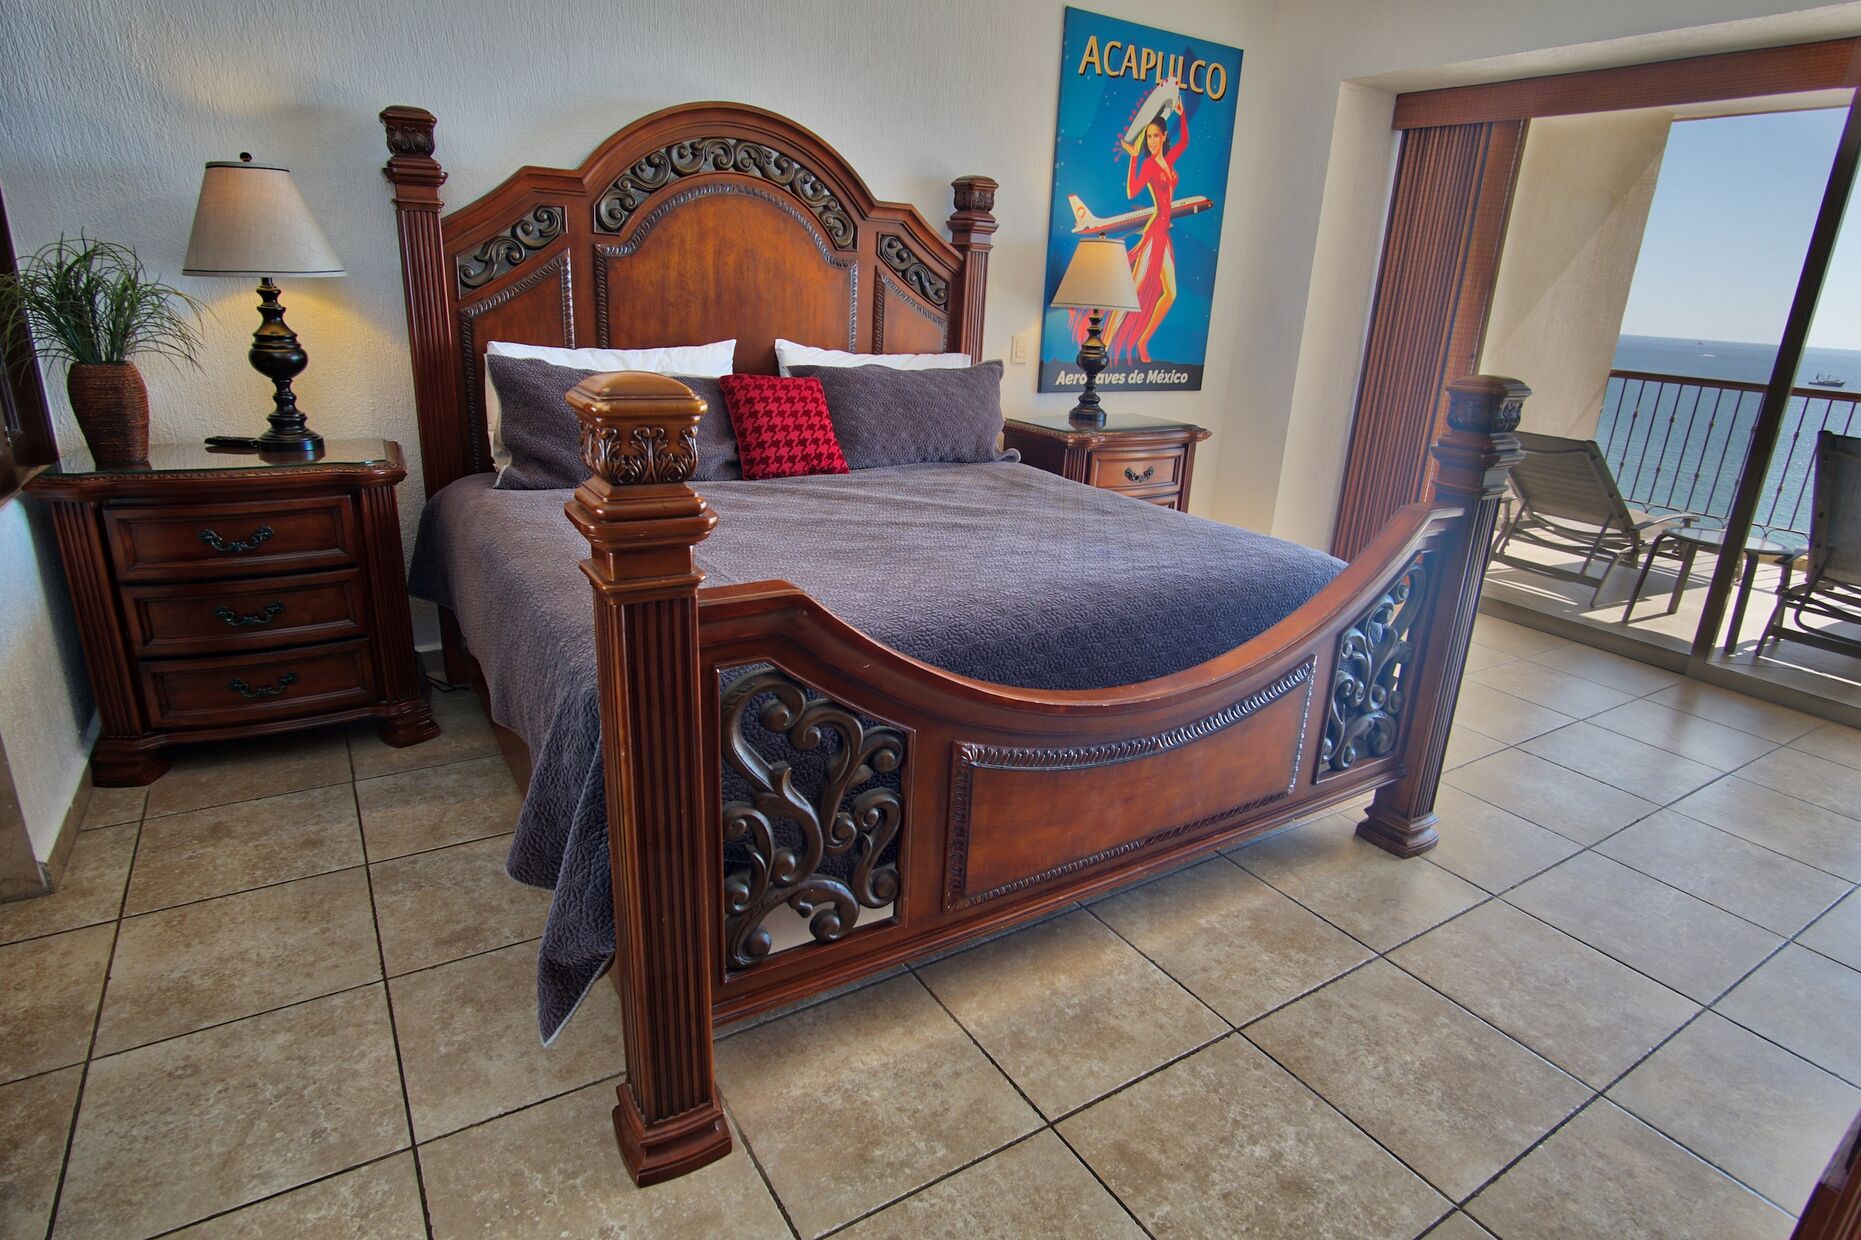 The master bedroom features it's own sliding door access to the patio.